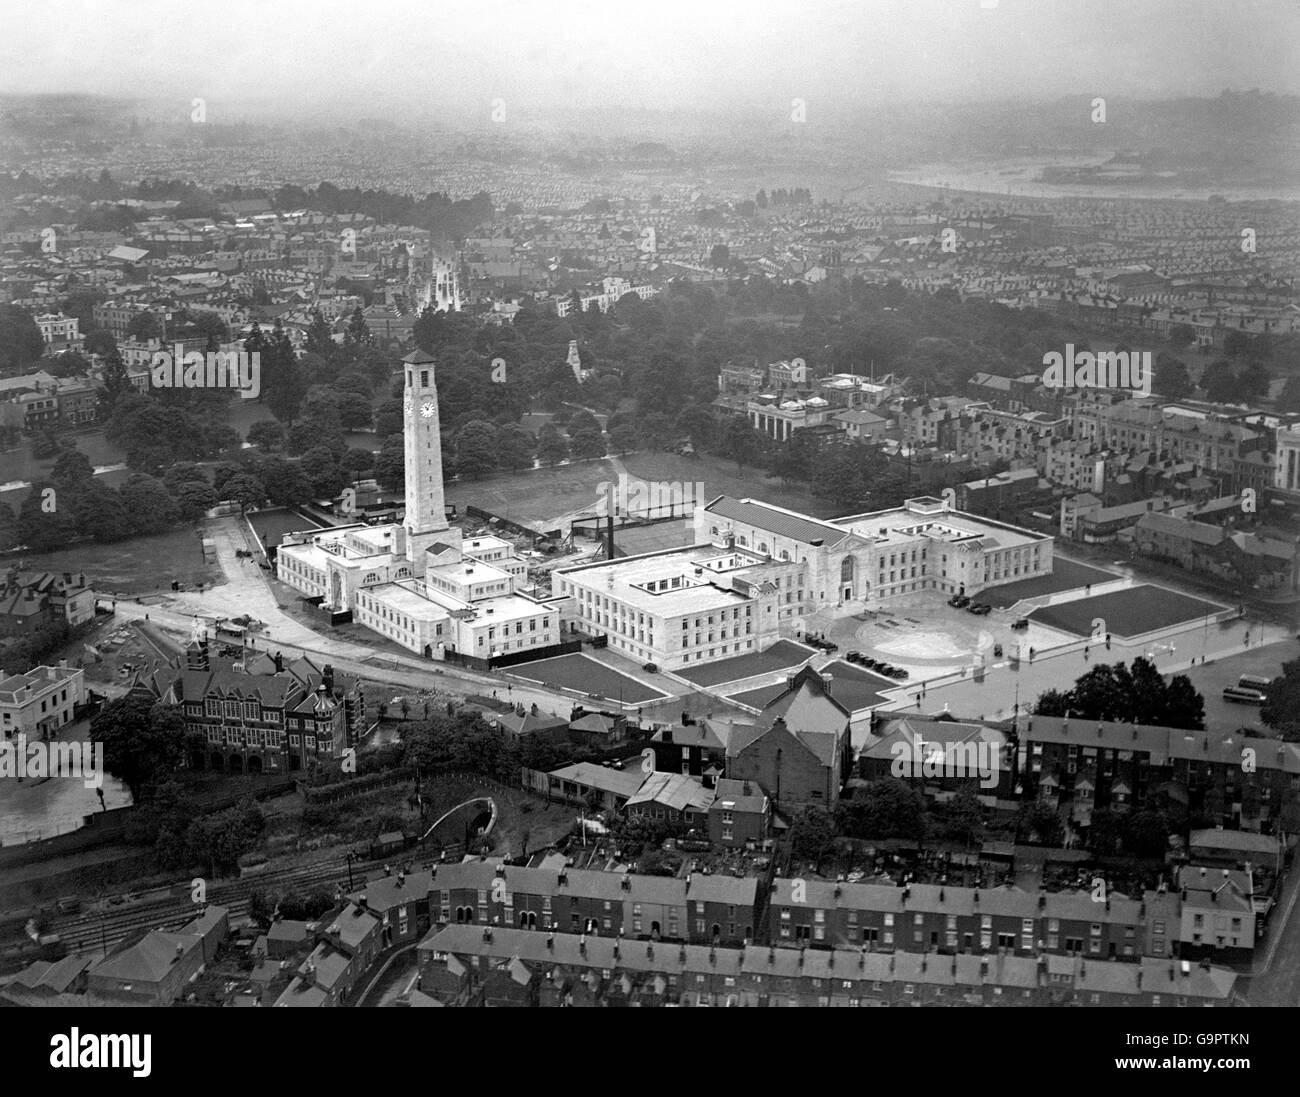 archive-Y1321 New Southampton Town Hall, not yet opened. Taken from A.P.N.A Plane during Weymouth flight. 1933 Stock Photo